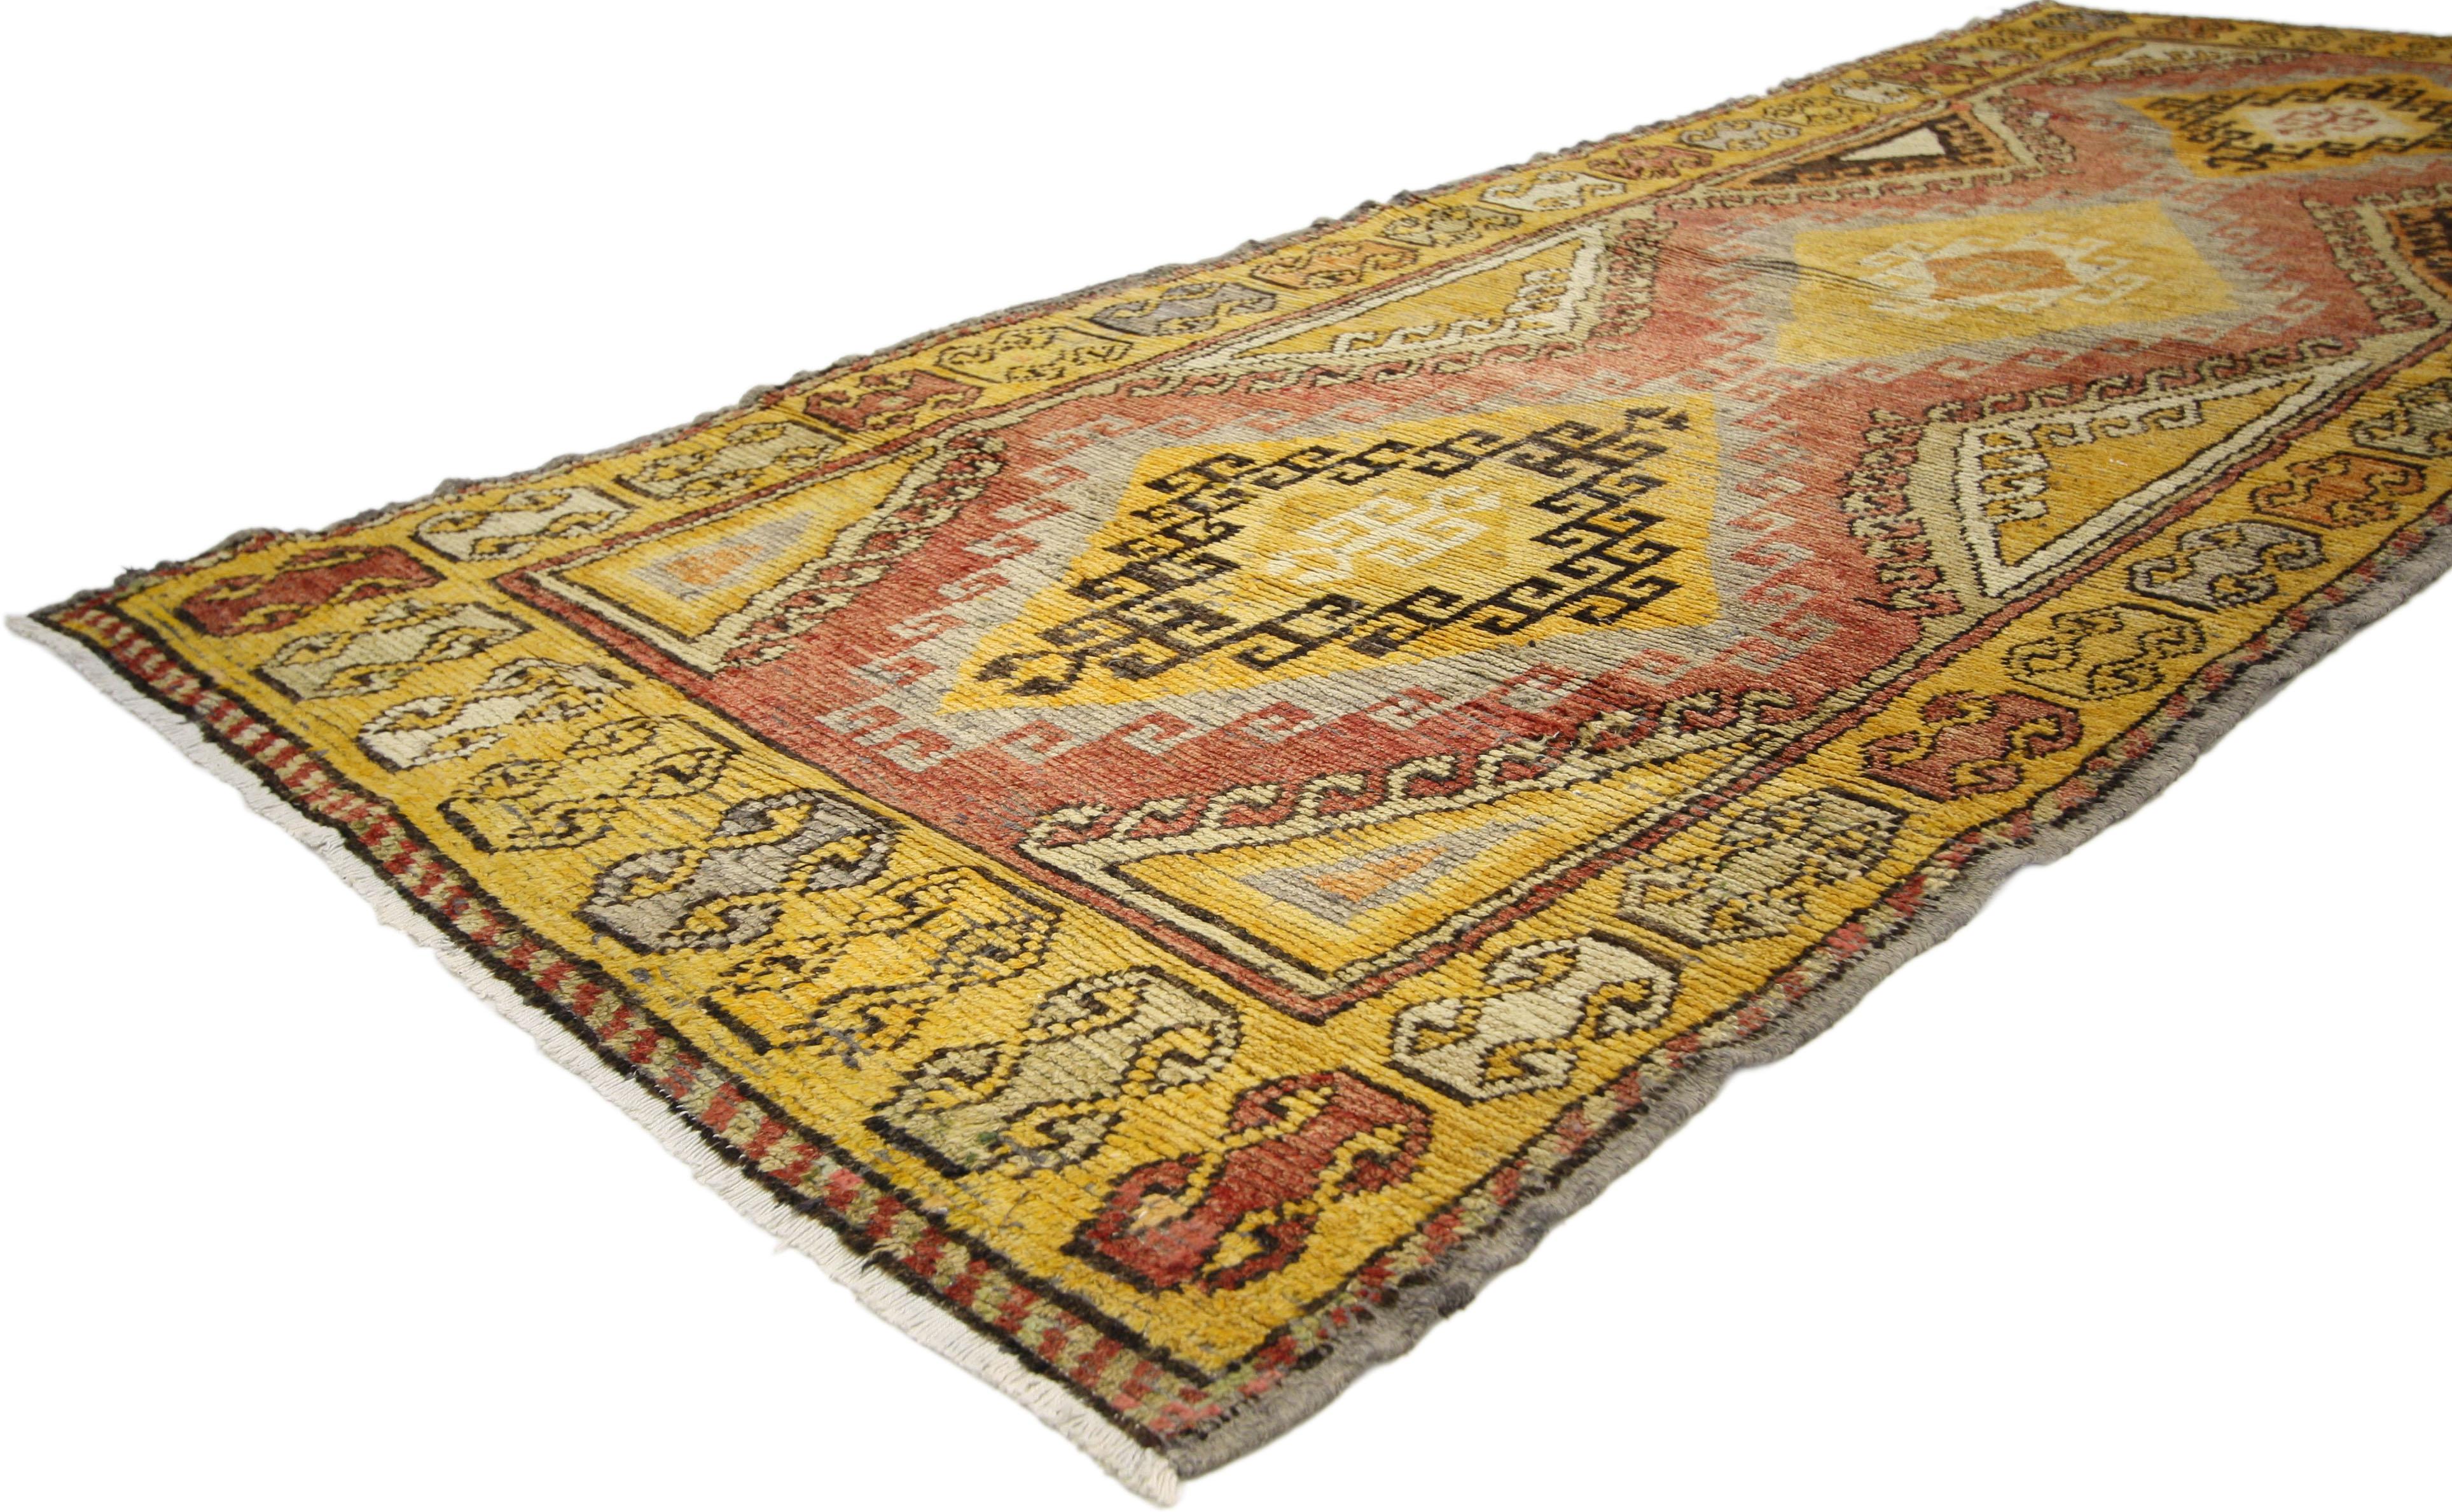 50238, vintage Turkish Oushak runner with Mid-Century Modern tribal style, hallway runner. This hand knotted wool vintage Turkish Oushak runner features three stacked lozenge medallions with latch hook edges and steep latch hooked ziggurats